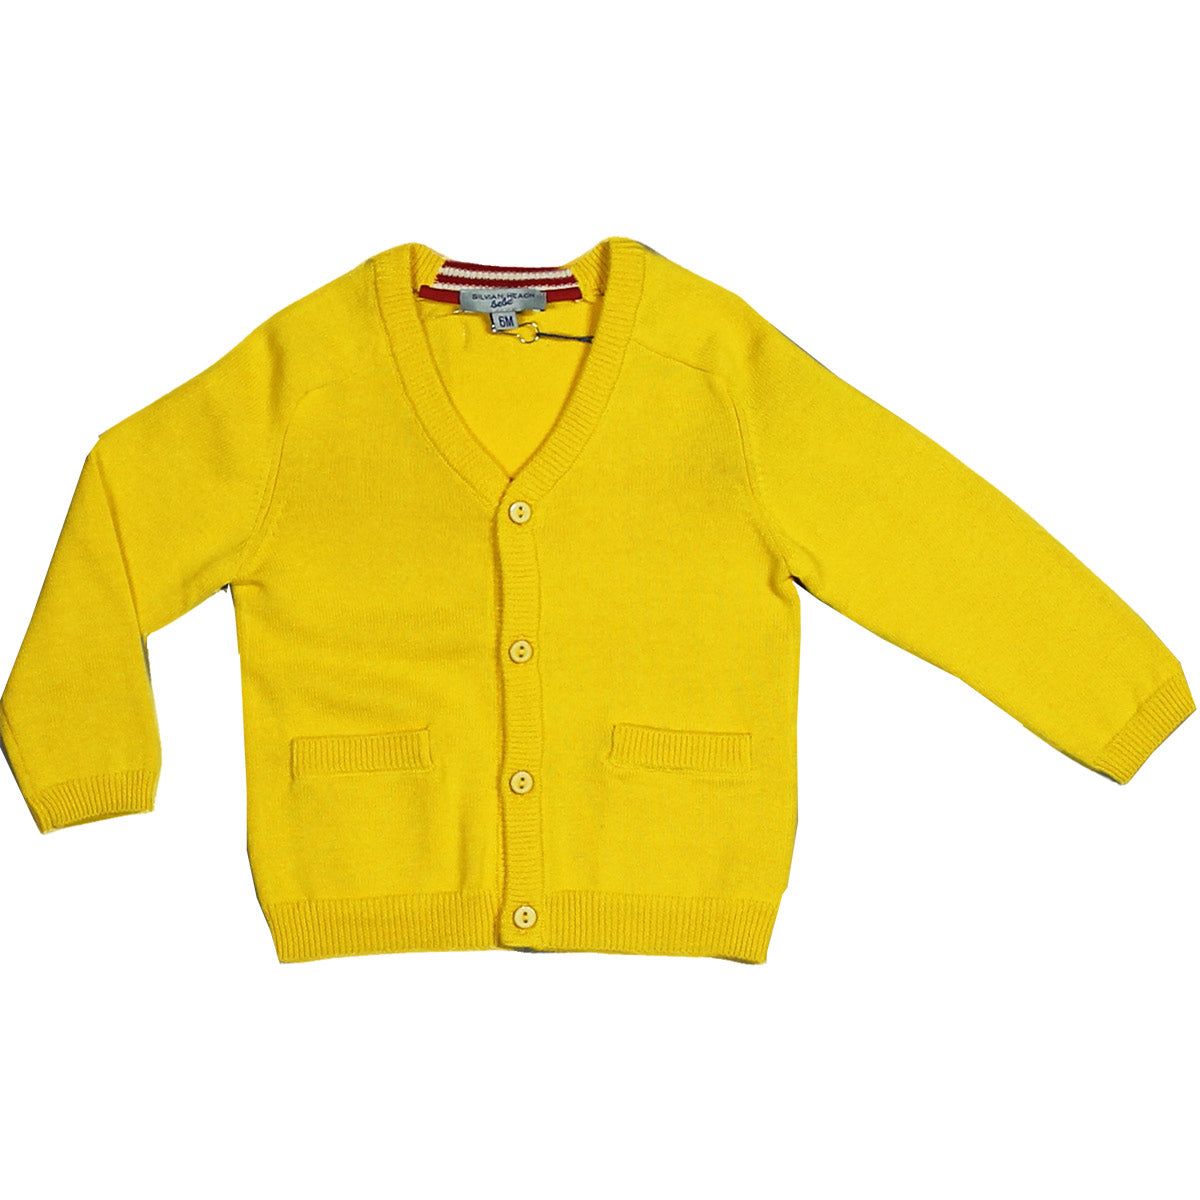 Cardigan from the Silvian Heach Kids clothing line, with v-neck and front pockets.
Composition: 1...